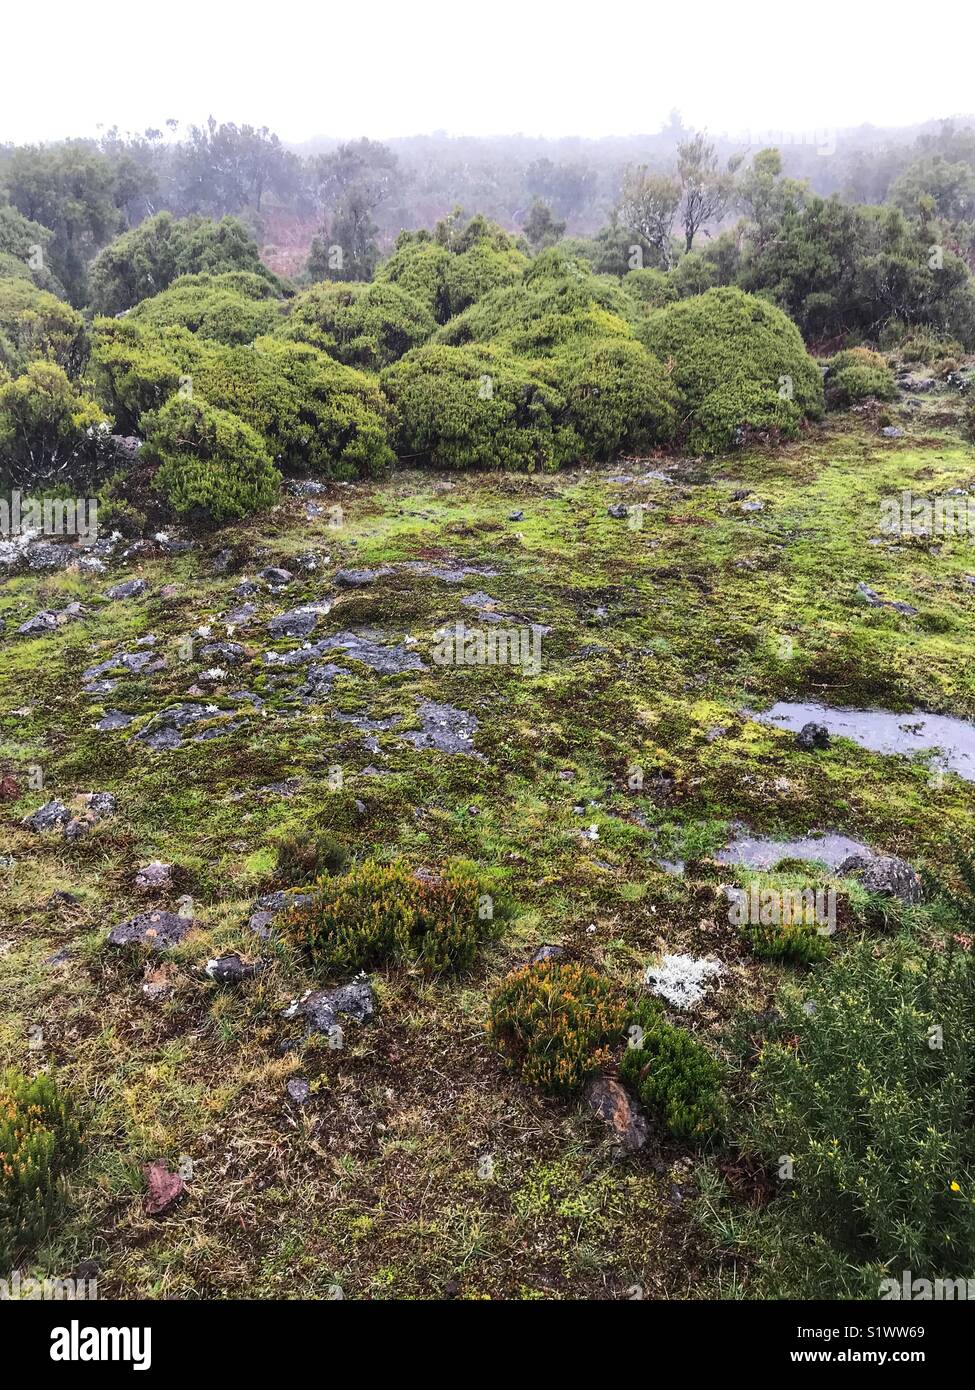 Paul da Serra, high altitude plateau often covered by mist in the central west of the island of Madeira, Portugal Stock Photo